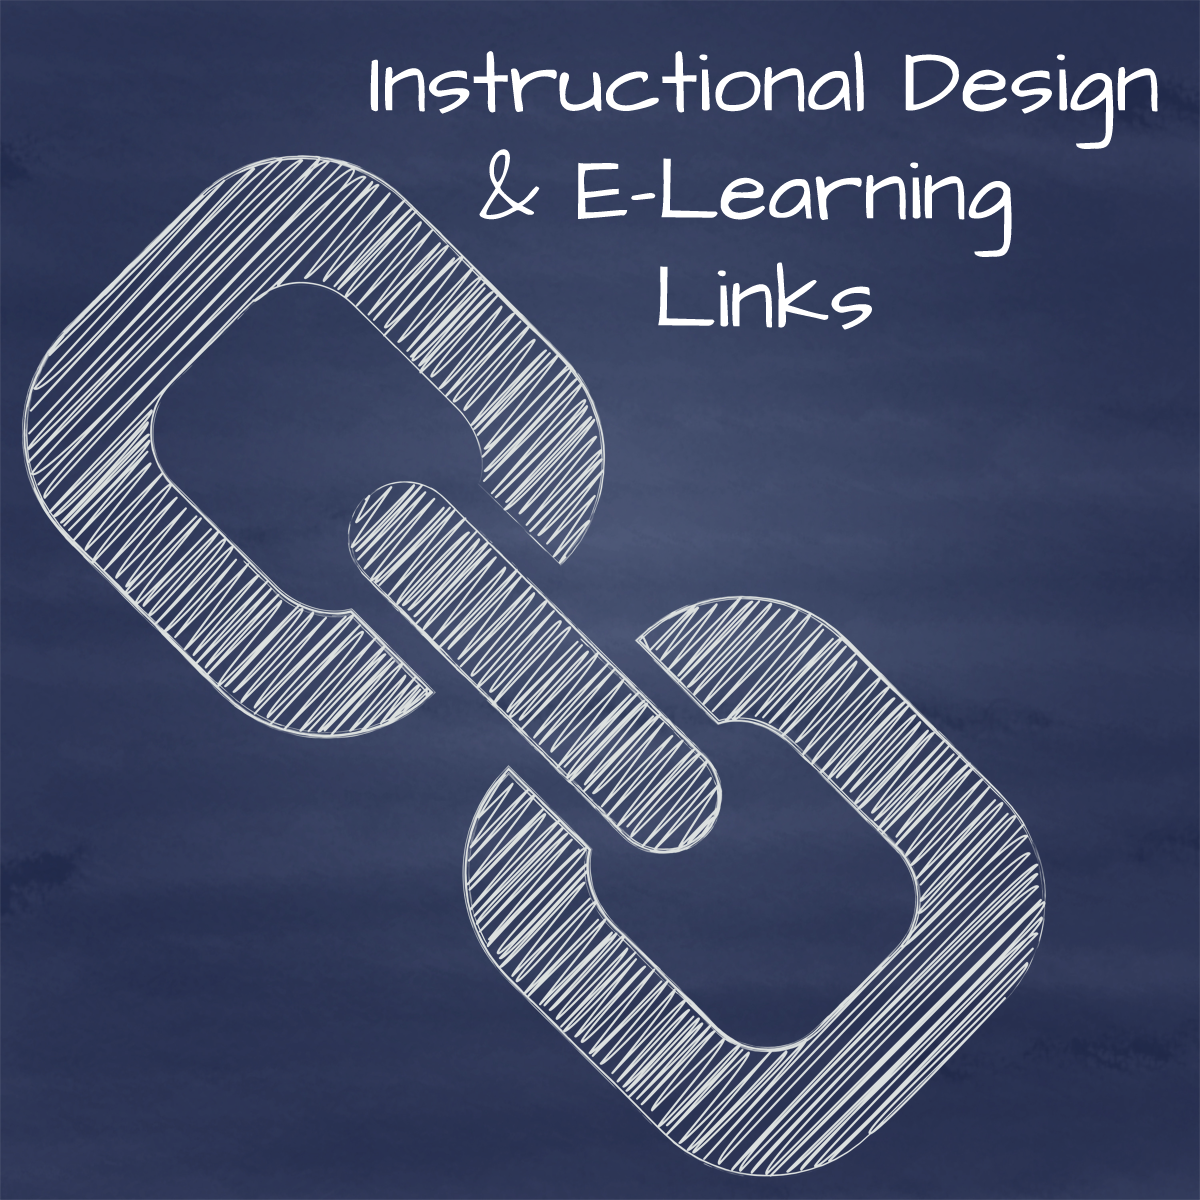 Instructional Design and E-Learning Links